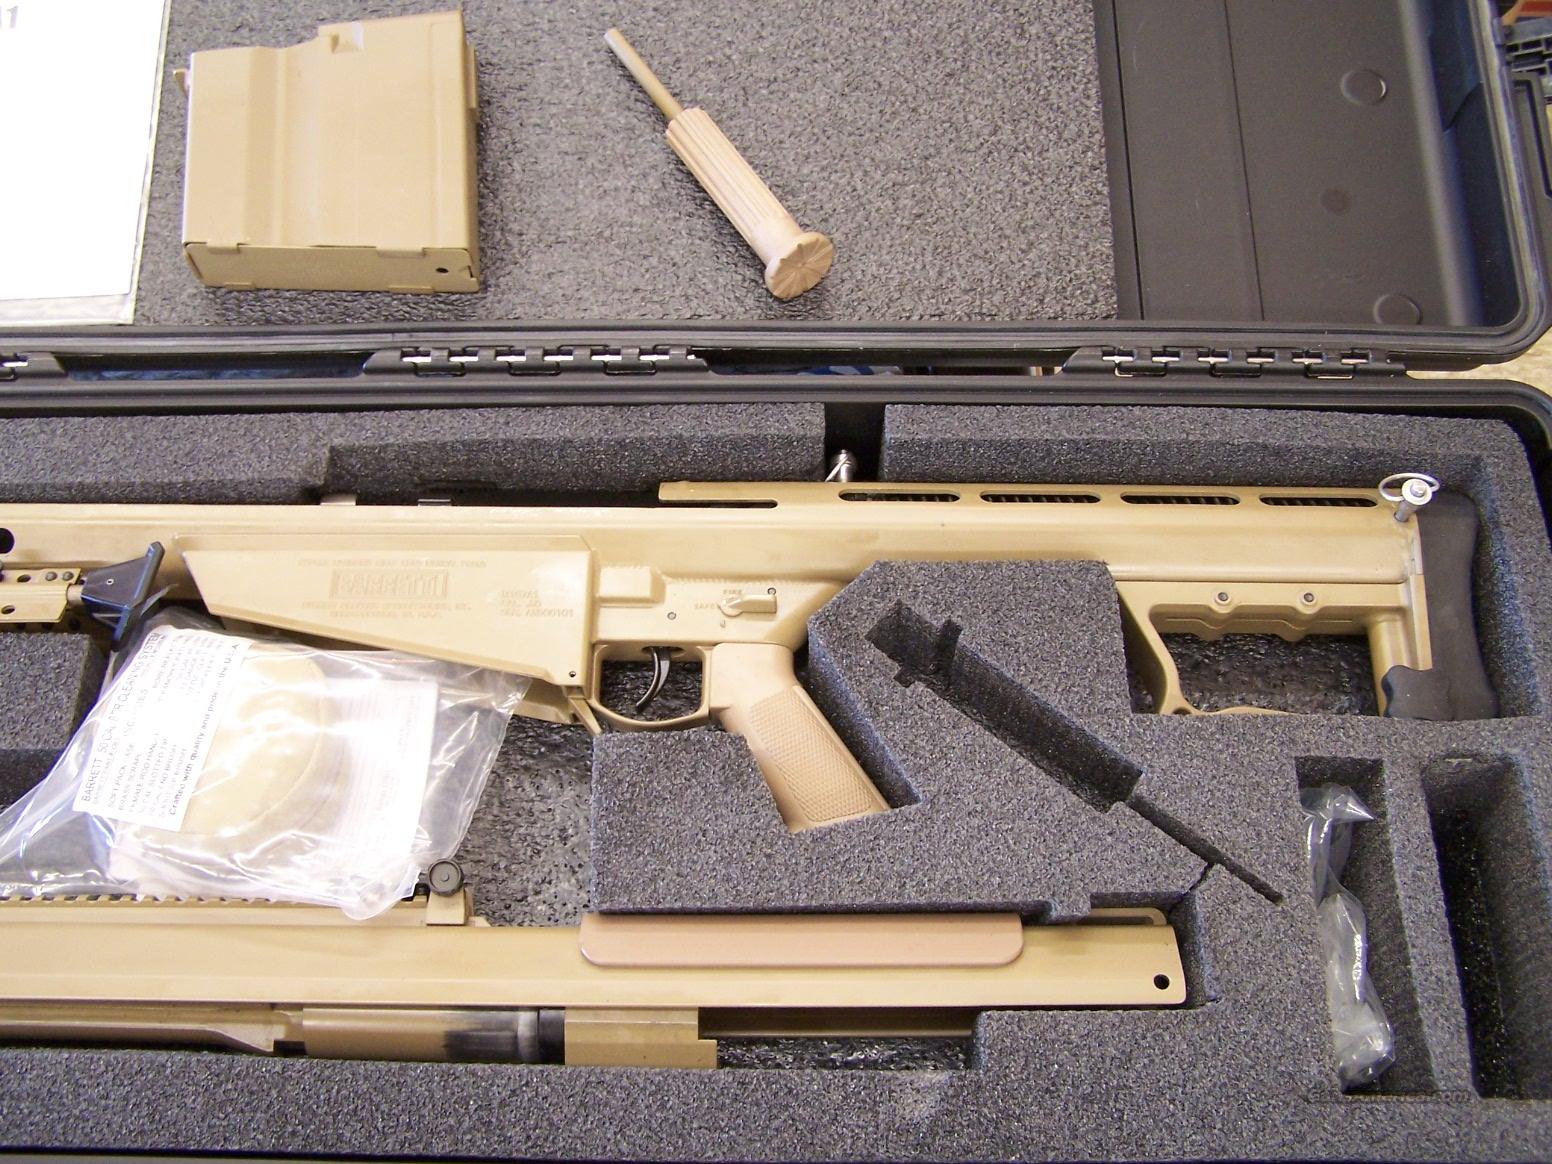 Barrett M107a1 50 Bmg 29 Barrel With Pelican Case For Sale 907793594